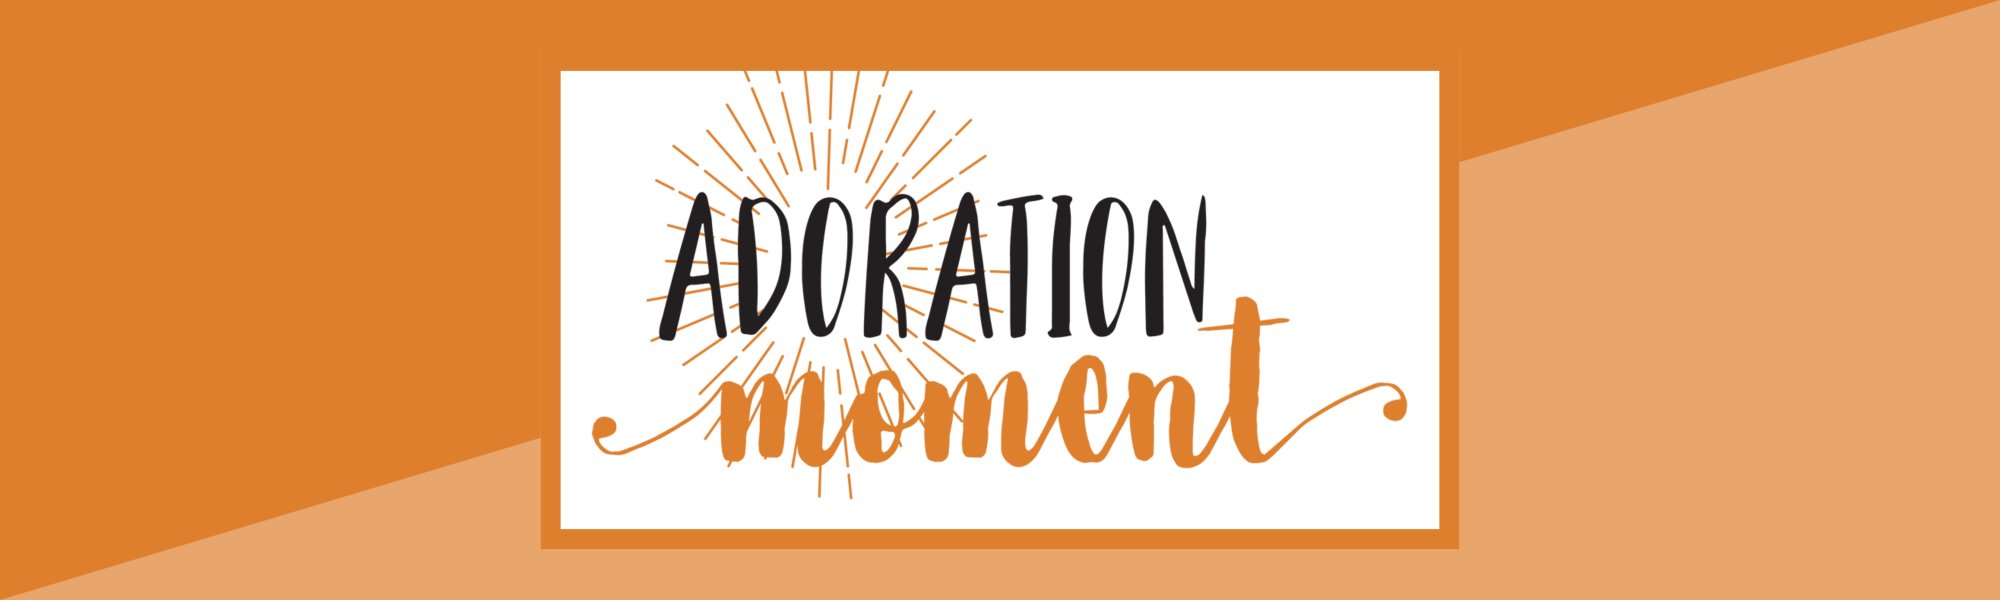 Adoration Moment is a meditative experience for anyone seeking a deeper peace and all good.